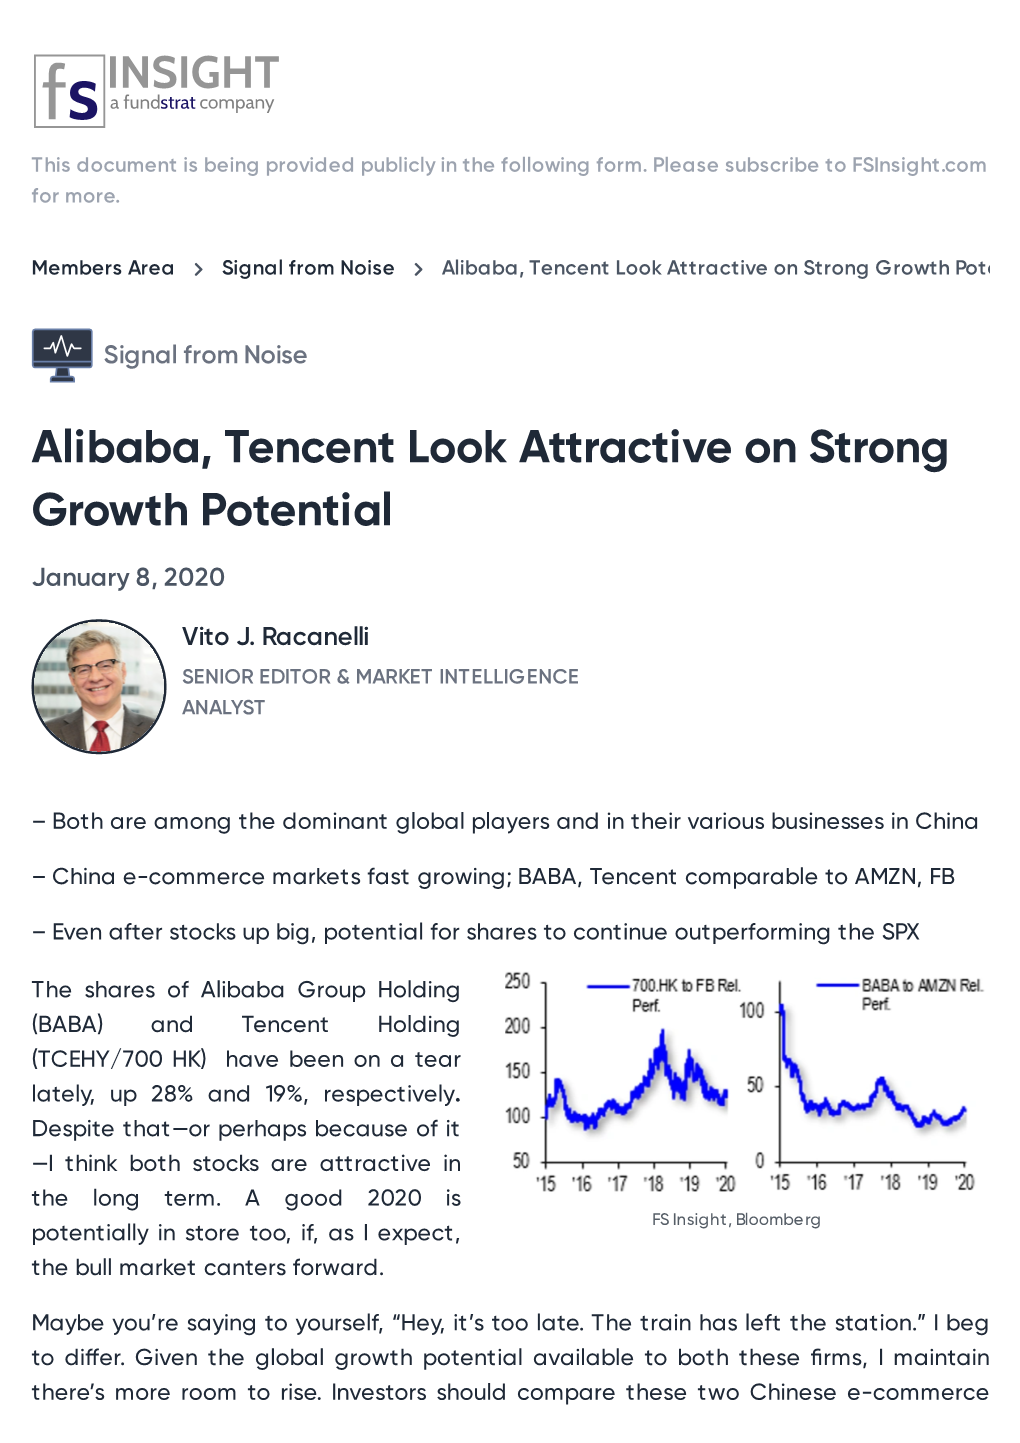 Alibaba, Tencent Look Attractive on Strong Growth Potential